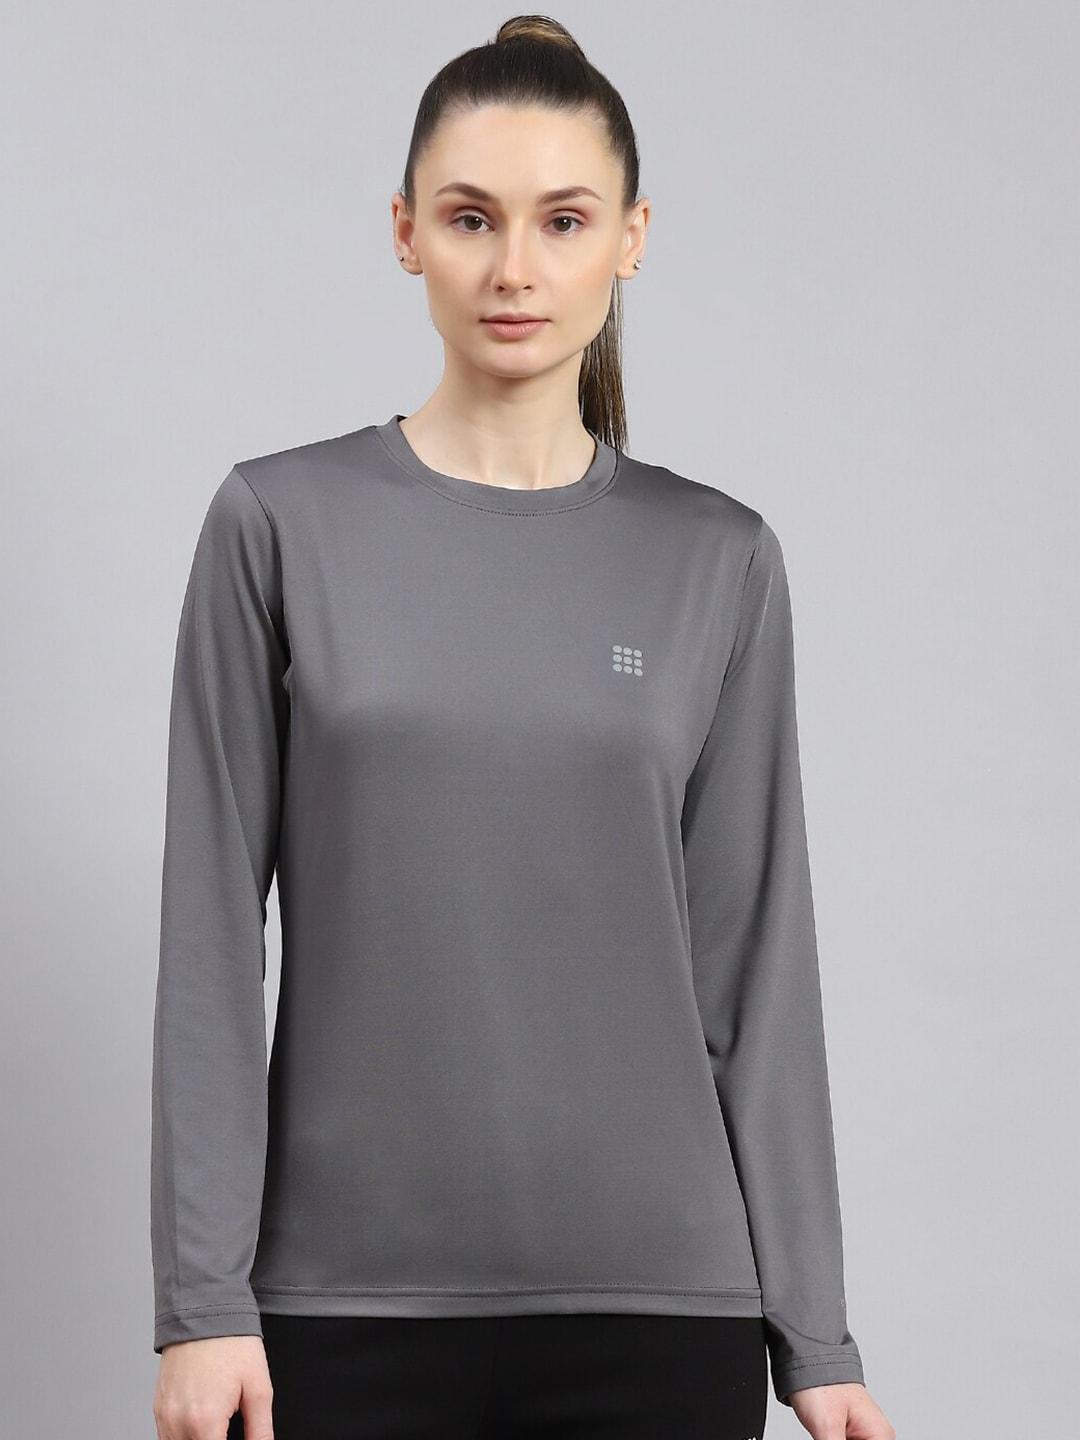 rock.it Round Neck Long Sleeves Sports T-shirt